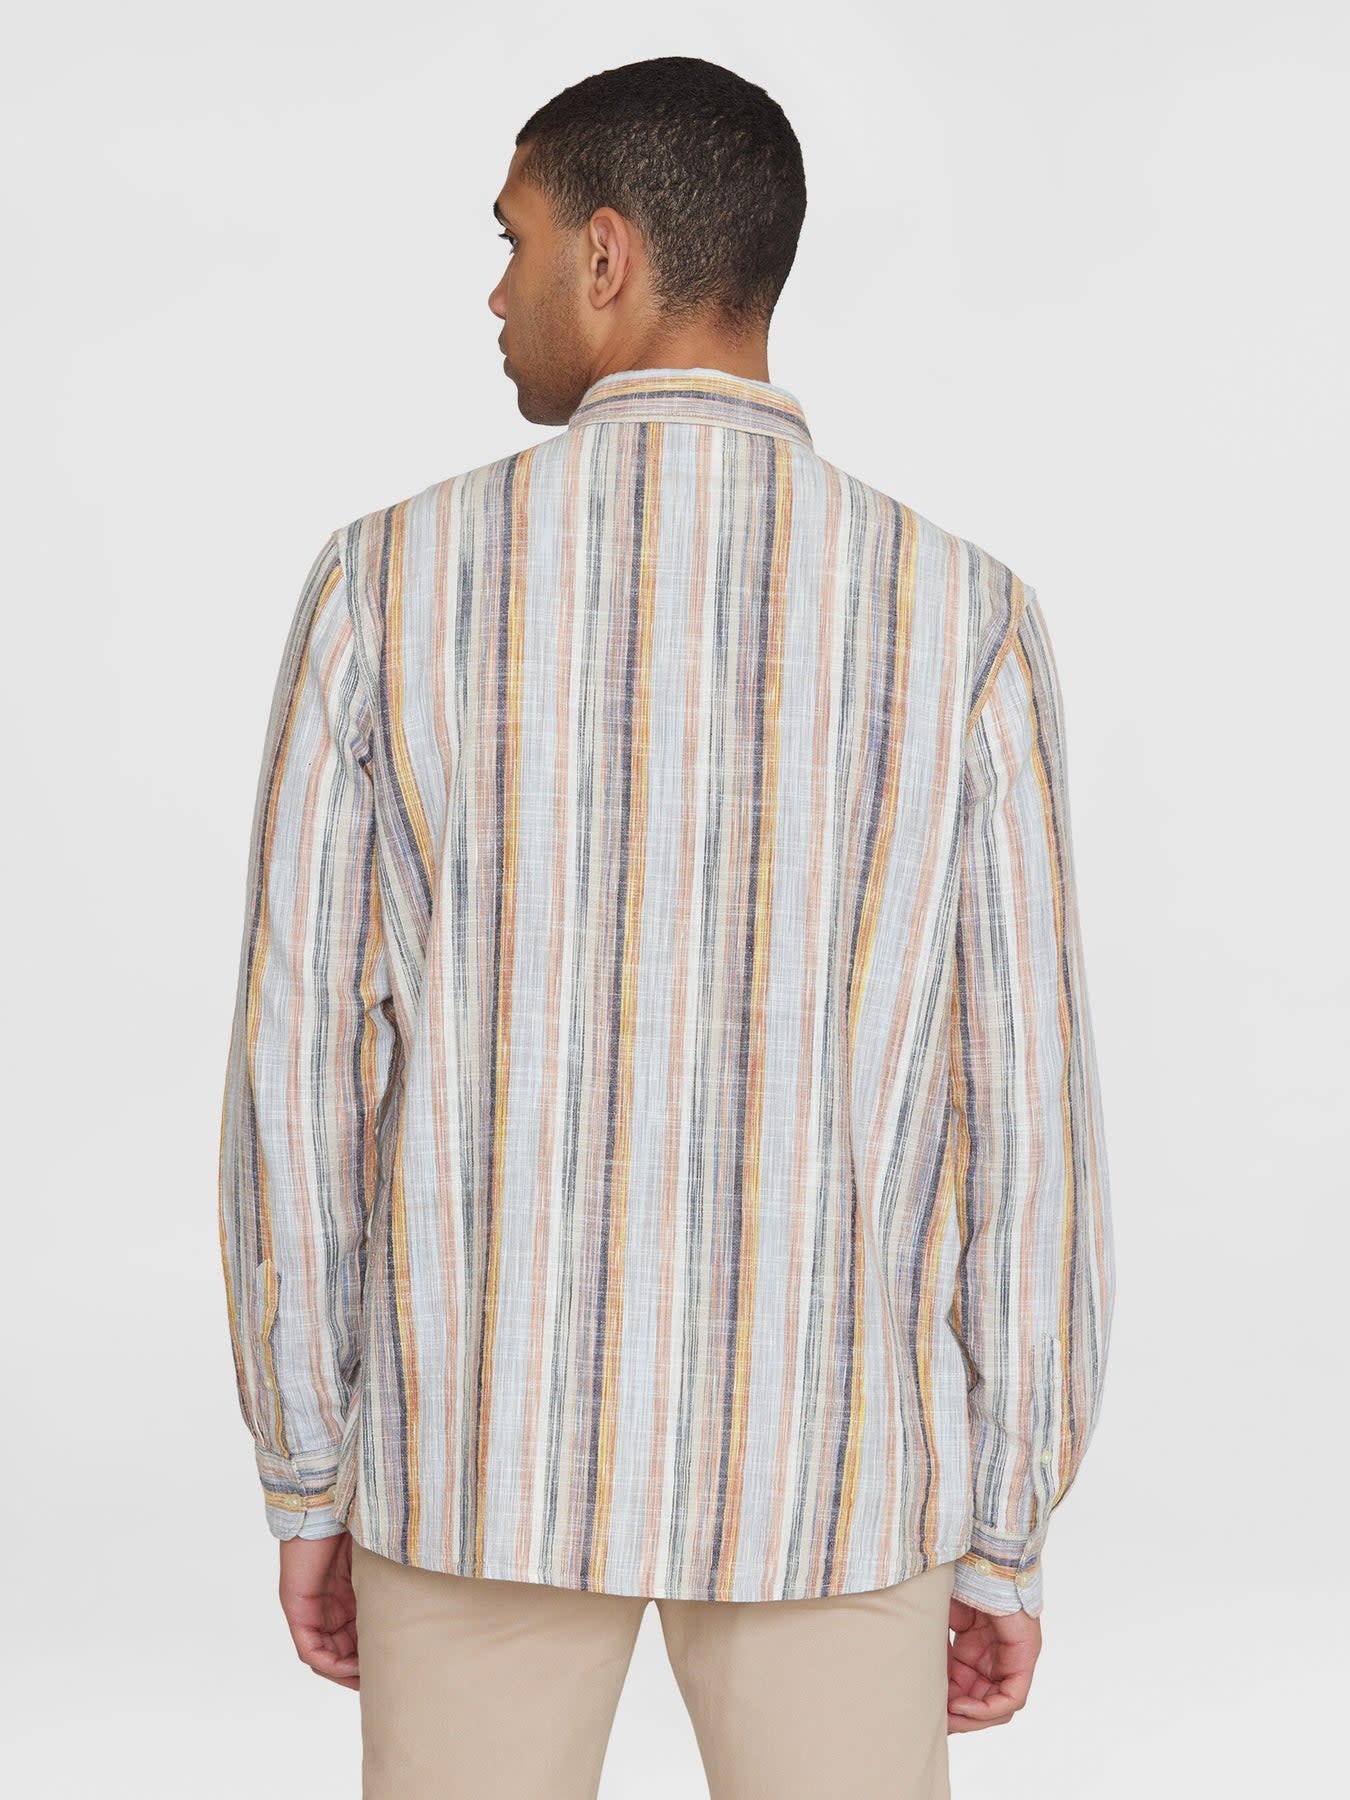 KnowledgeCotton Apparel KnowledgeCotton, Loose Striped Linen Shirt, multicolored, S